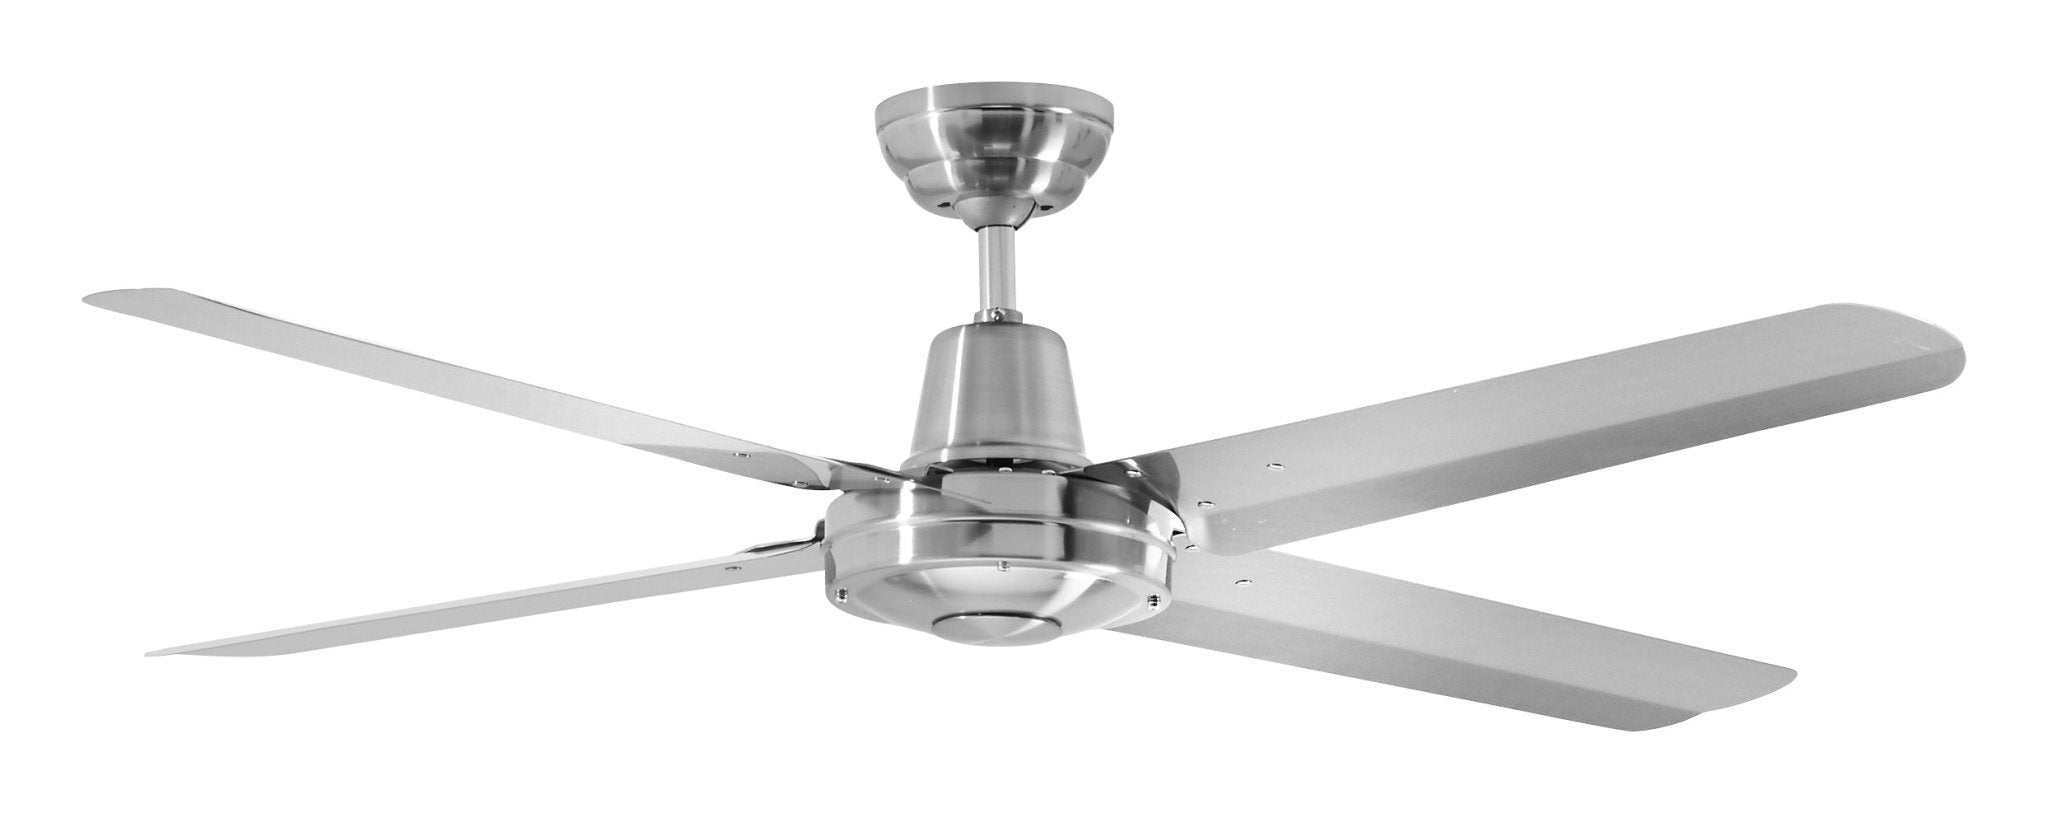 Precision 1300mm 52" 304 Grade Stainless Steel 4 Blade Ceiling Fan by Martec - Mases LightingMartec